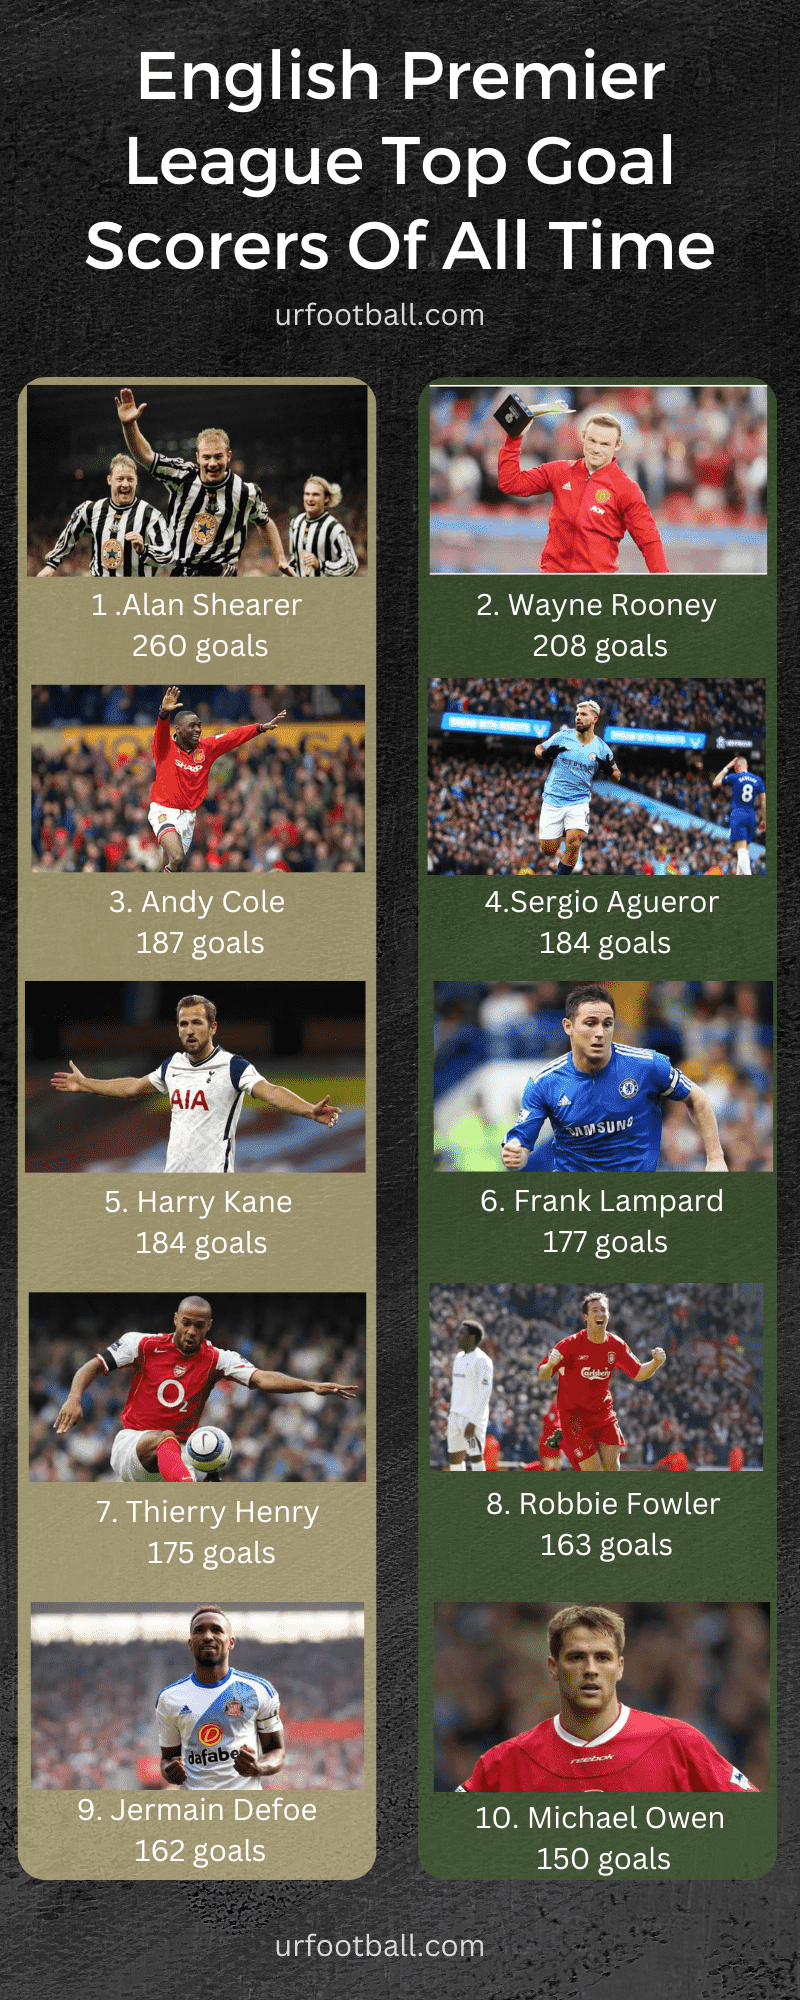 English Premier League Top Goal Scorers Of All Time - Infographic